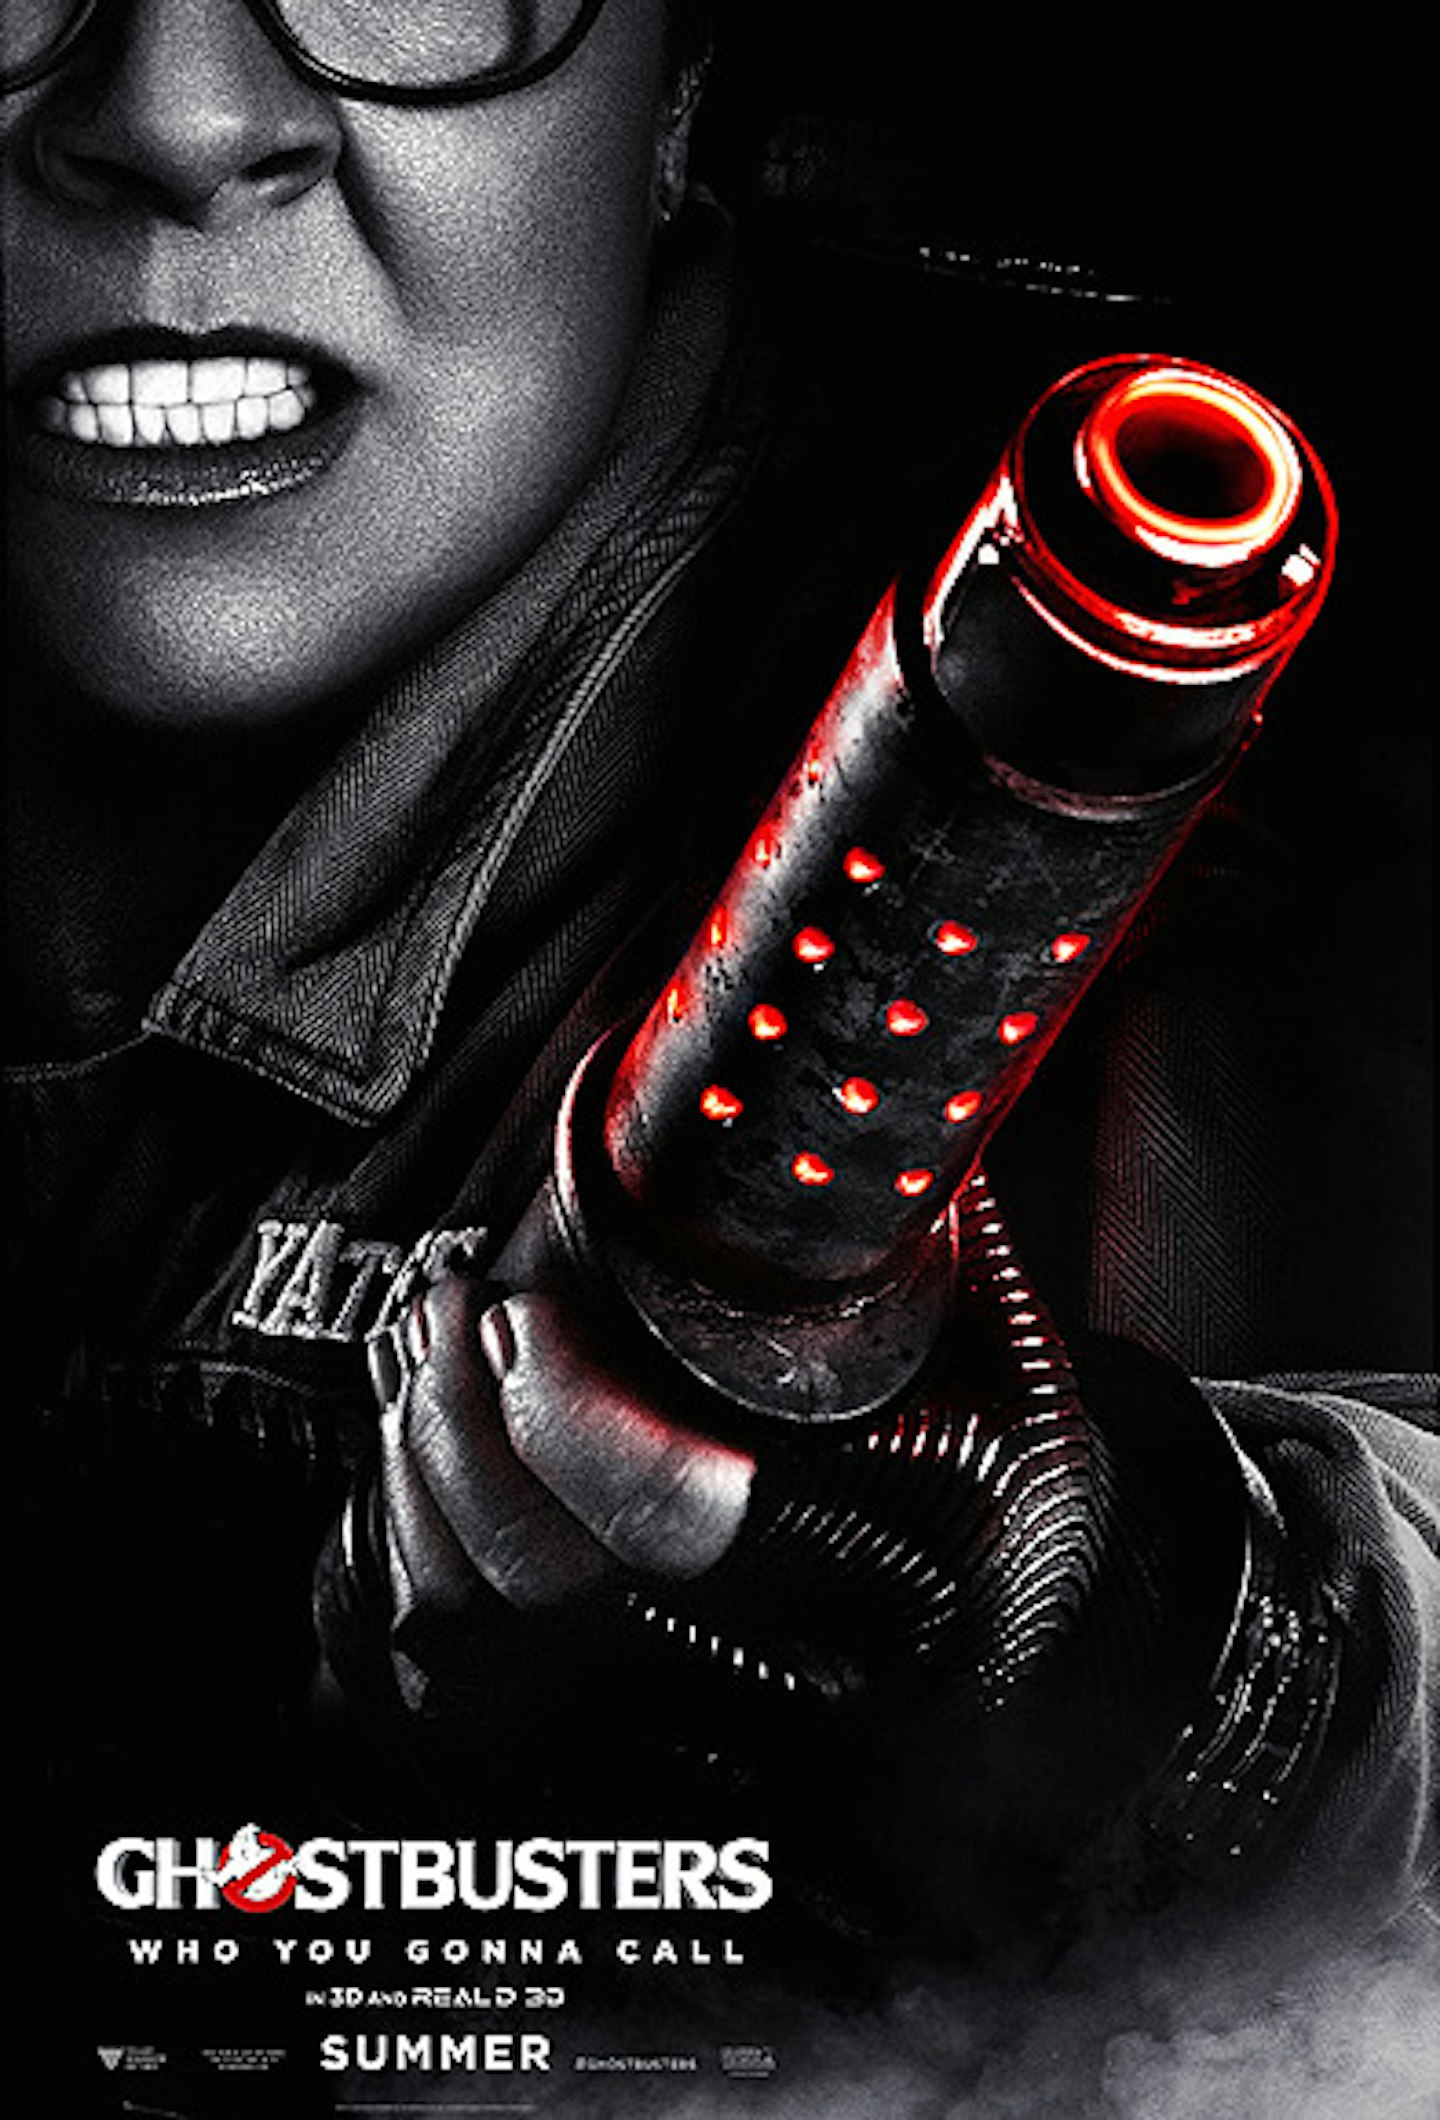 Ghostbusters Melissa McCarthy poster